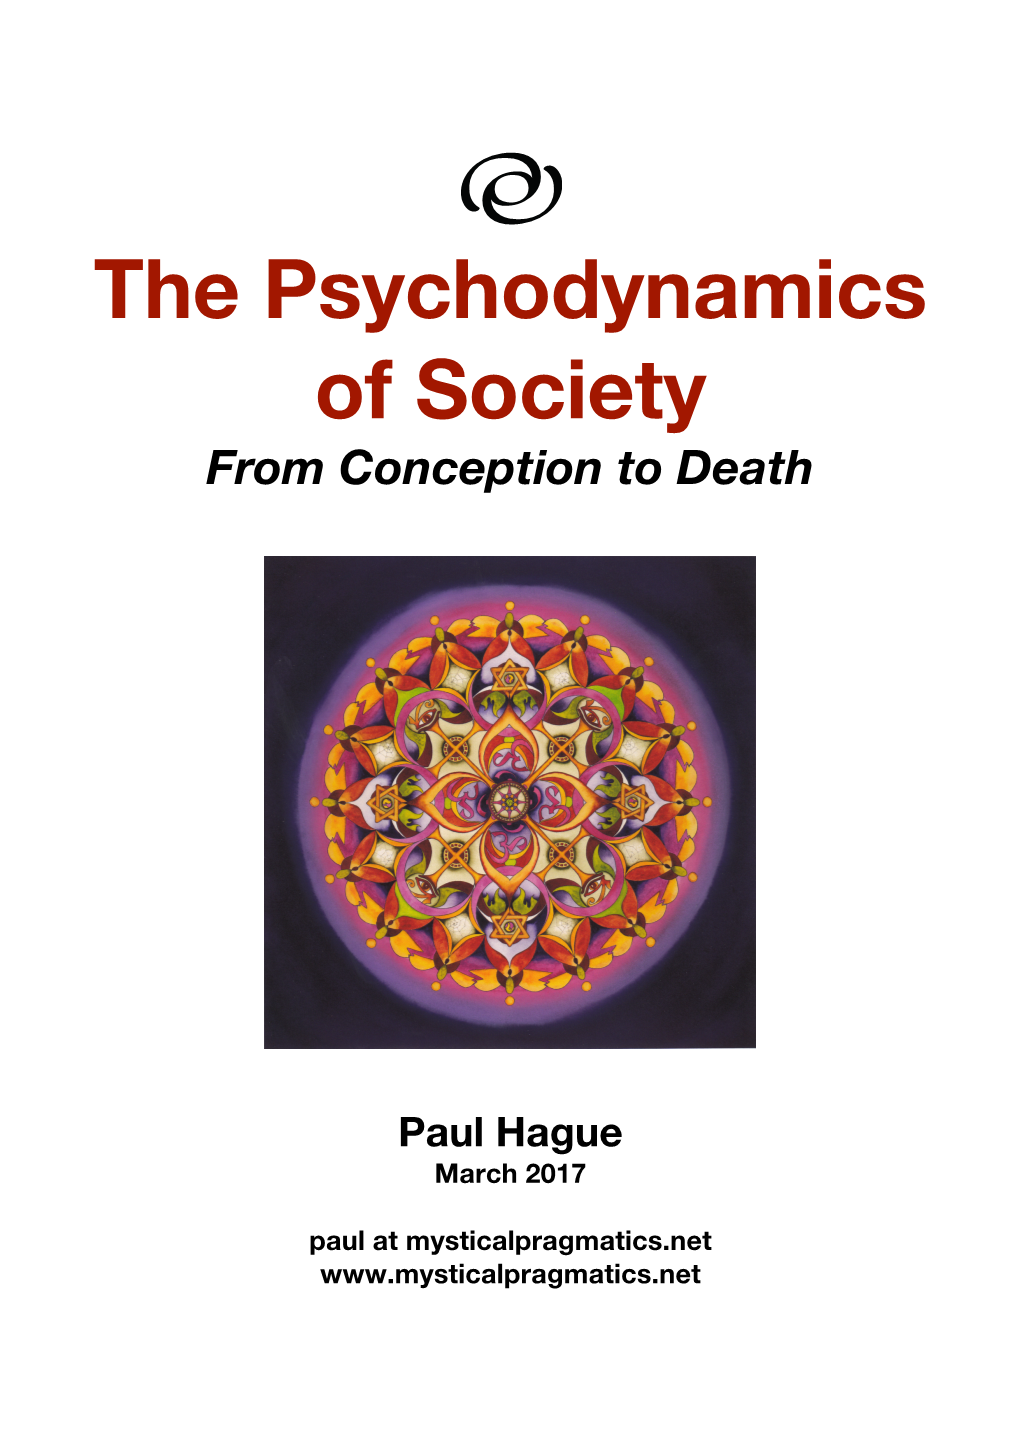 The Psychodynamics of Society from Conception to Death